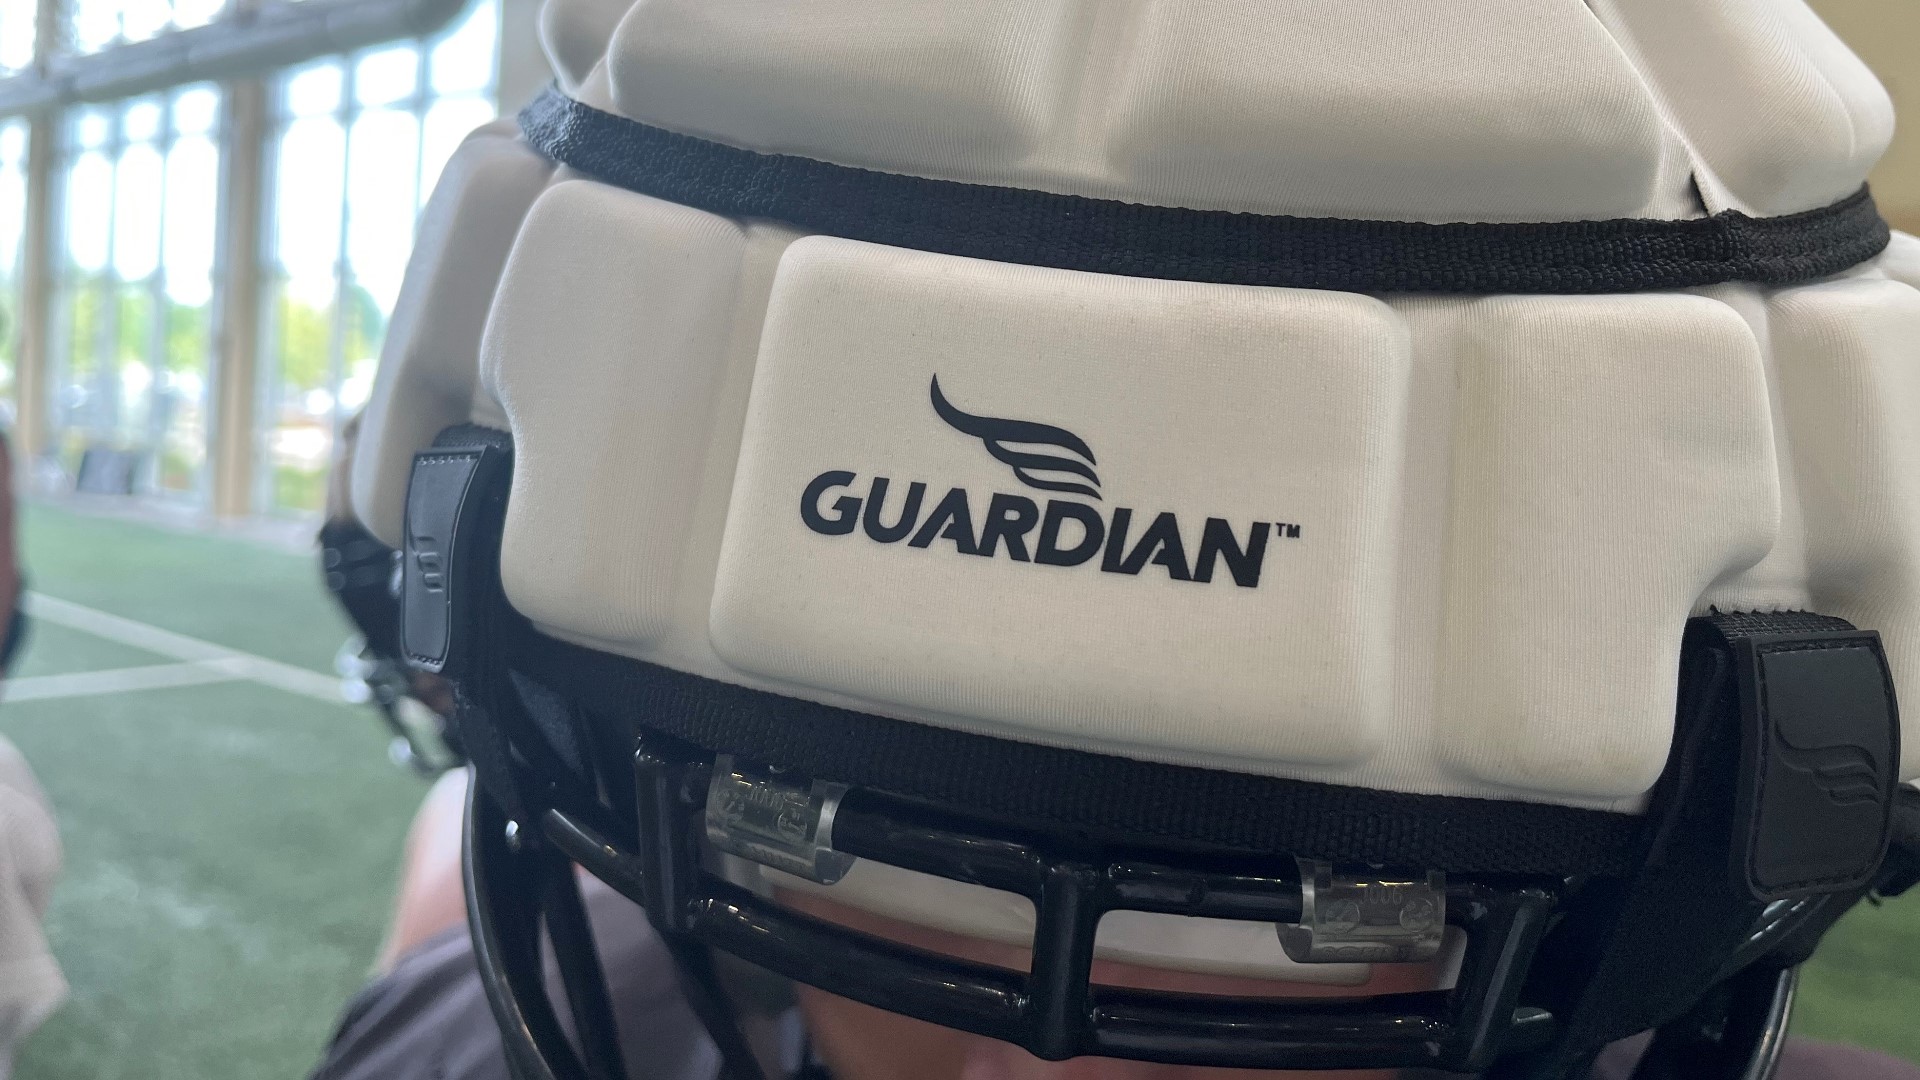 When the Park High football team takes the field at TCO Stadium Thursday, they'll be the first team in the state — maybe even the country — to play in Guardian Caps.